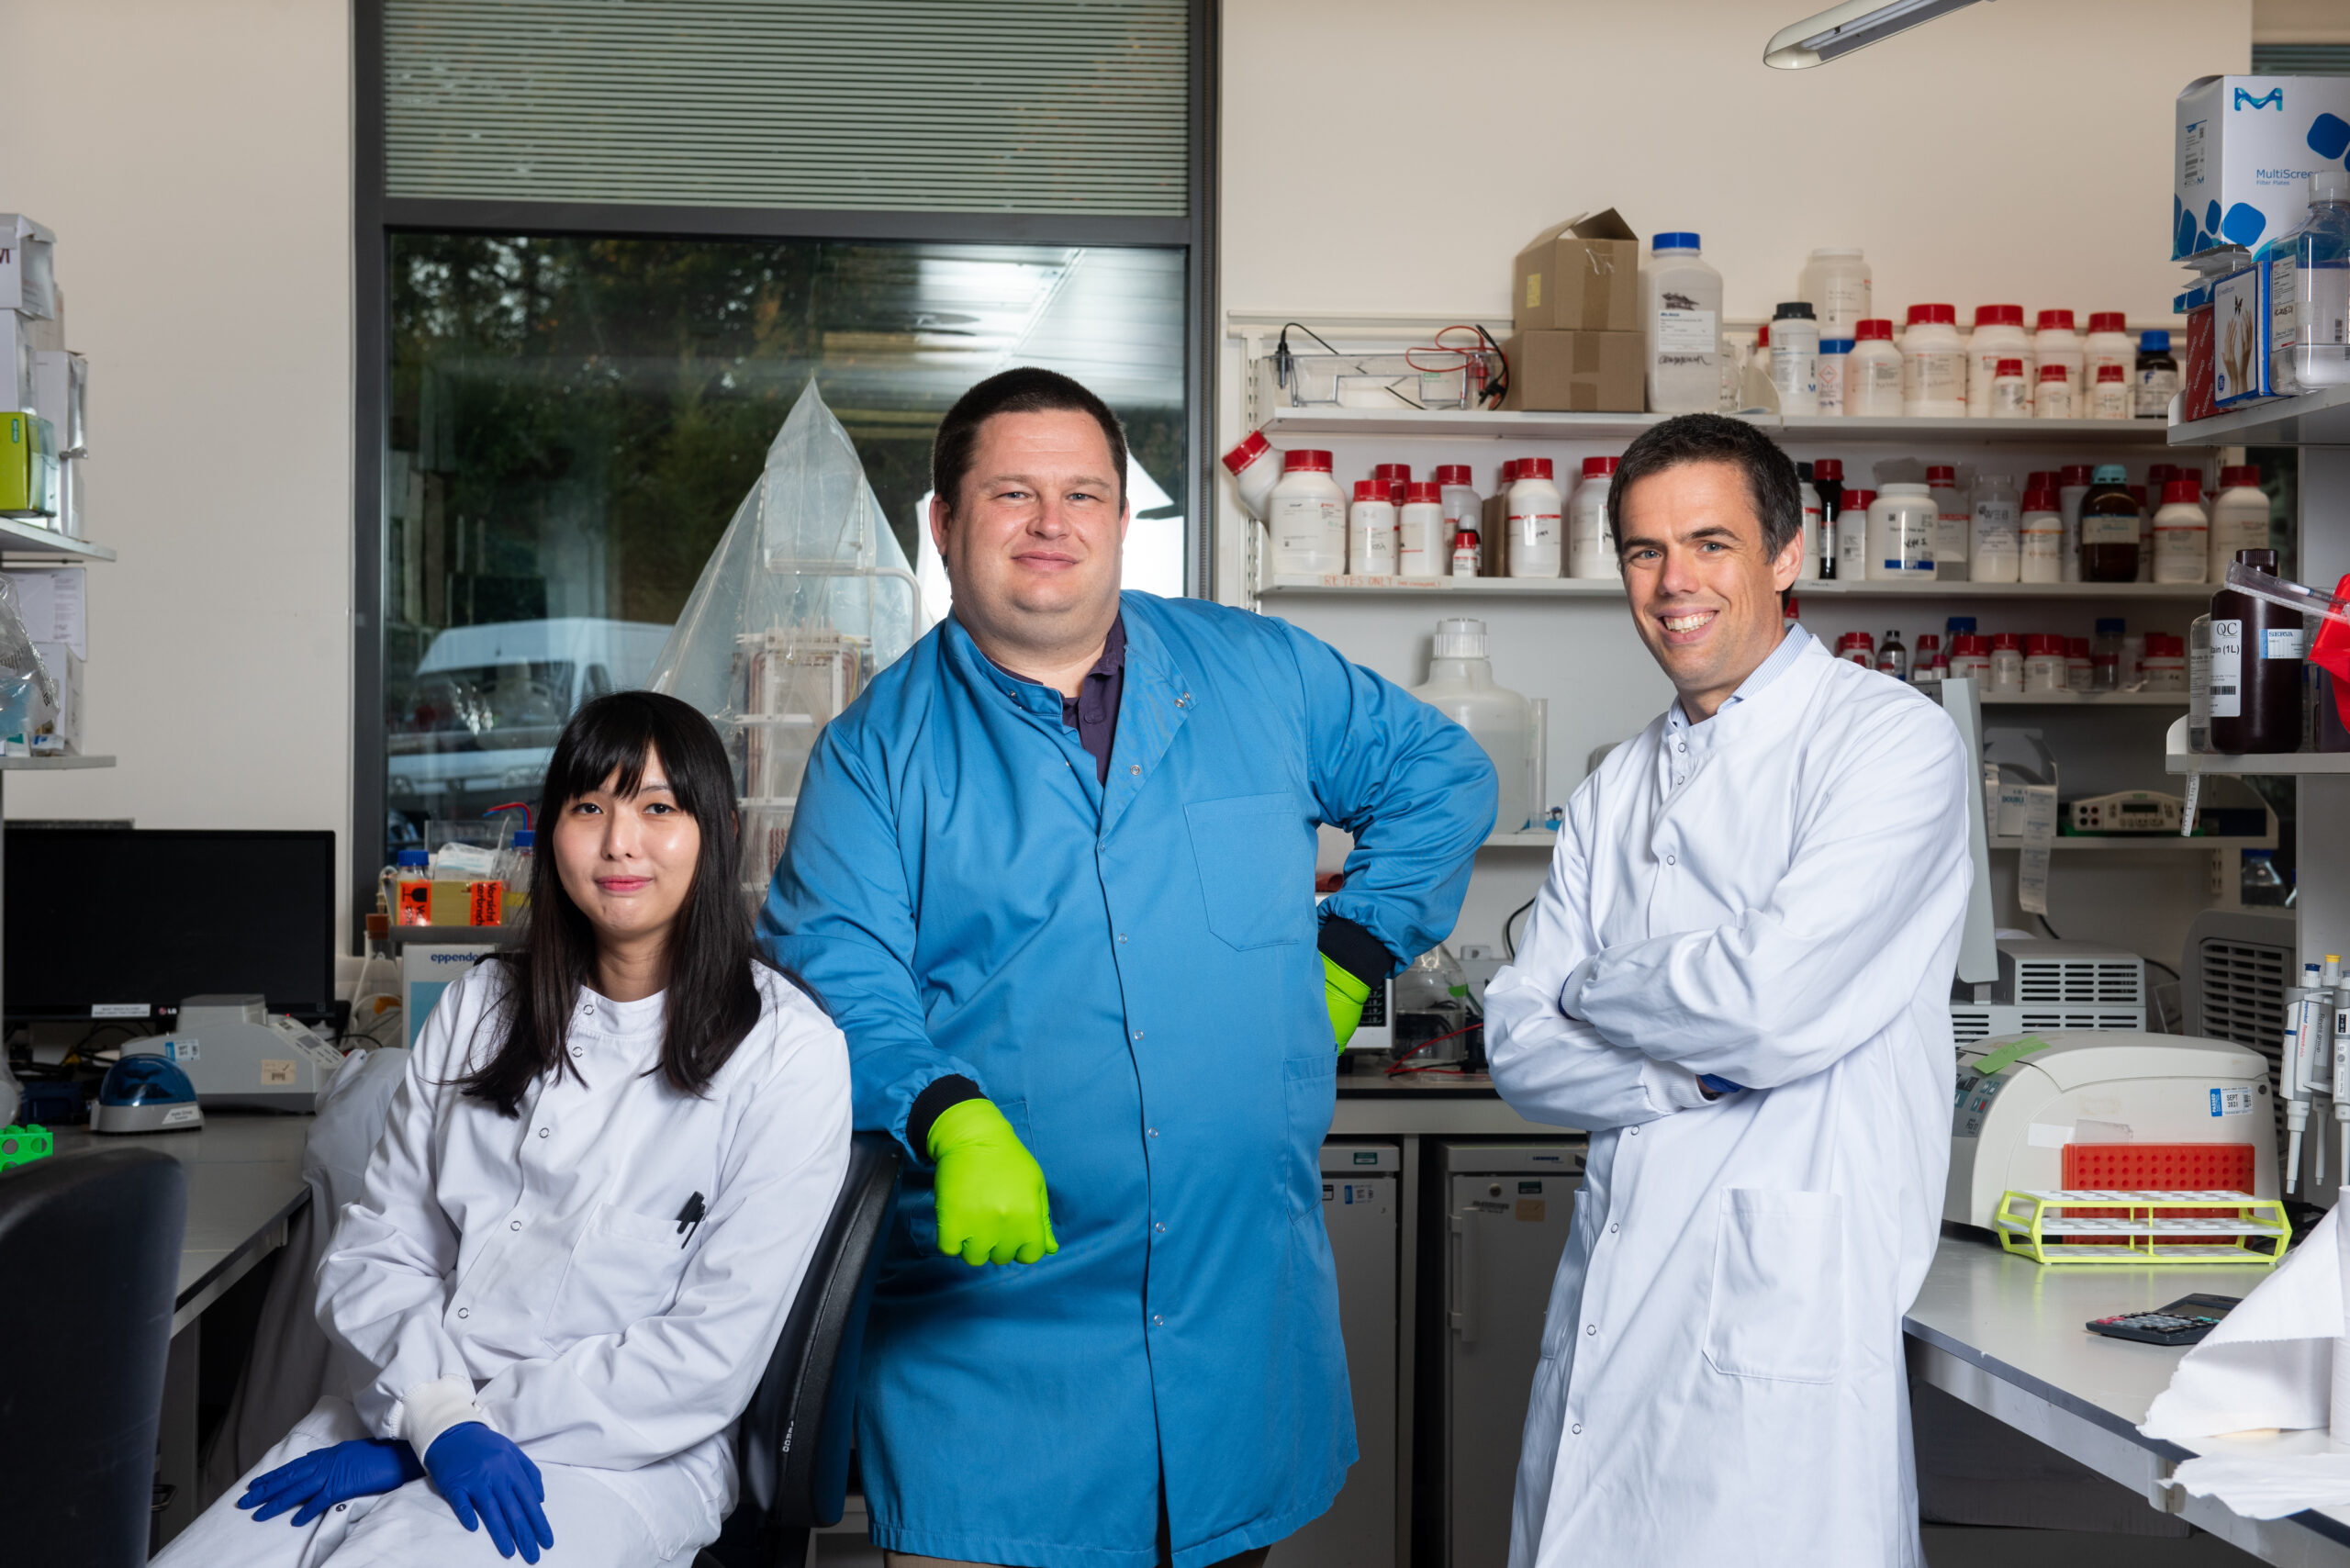 Adam Ritchie (in the middle) and his colleagues at the Jenner Institute in Oxford. PHOTO: John Cairns